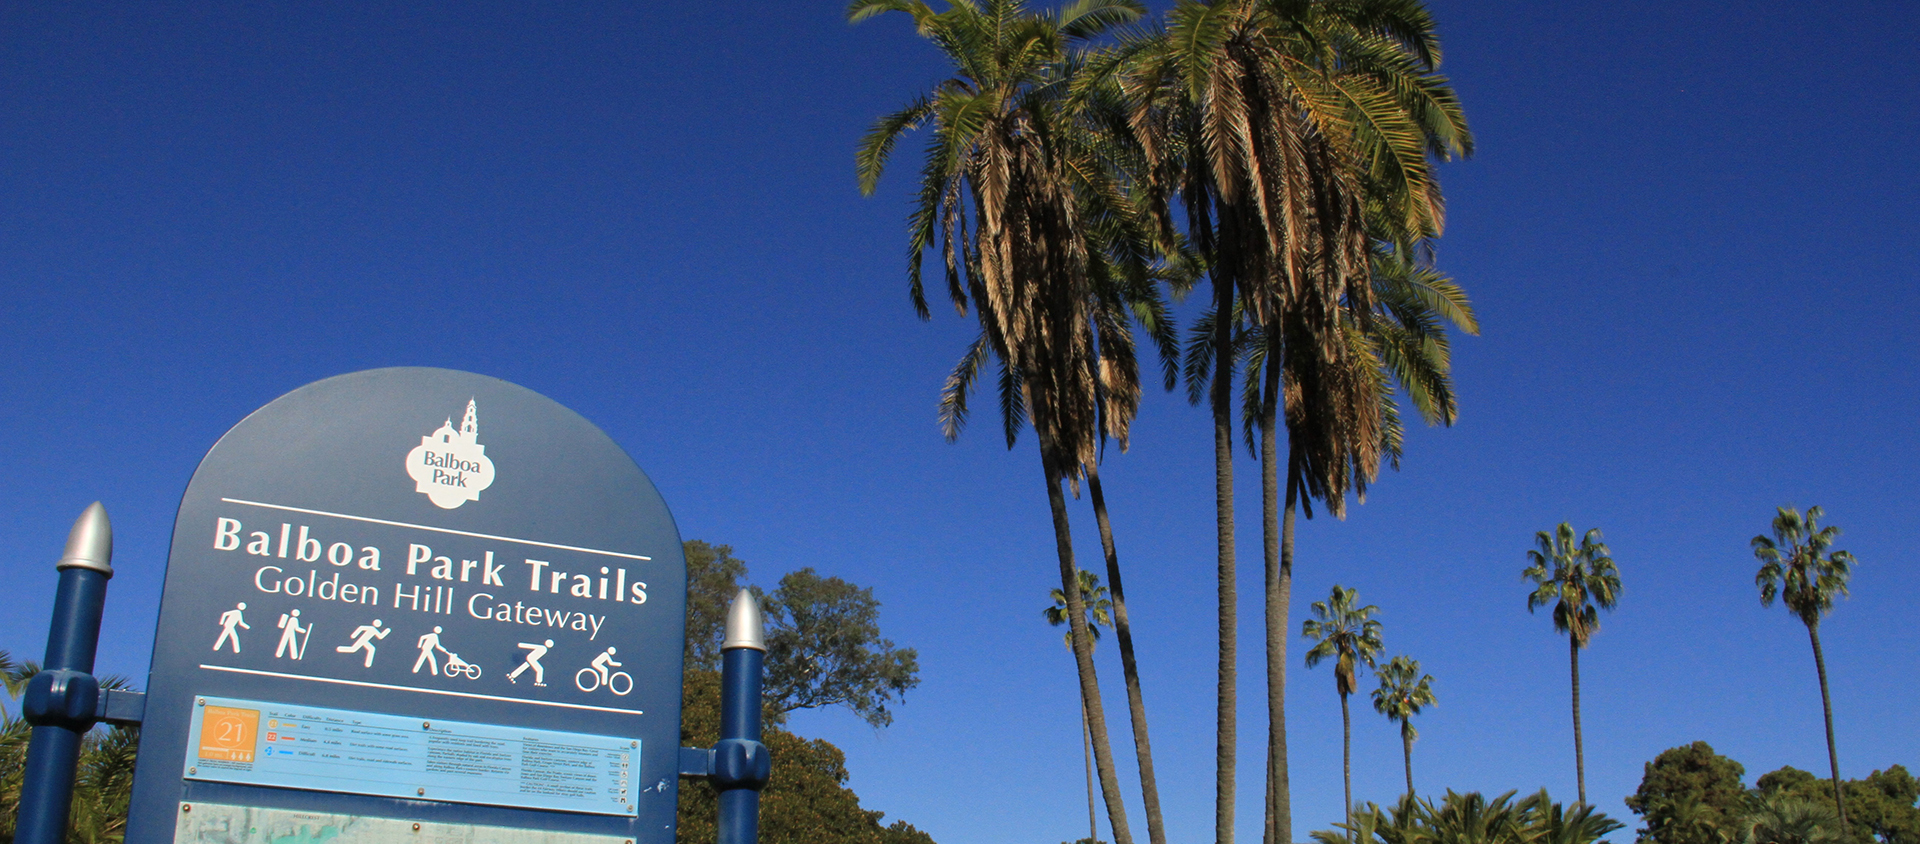 Balboa Park Trails sign for Golden Hill Gateway with a trail map and legend. Trees and blue sky are in the background.